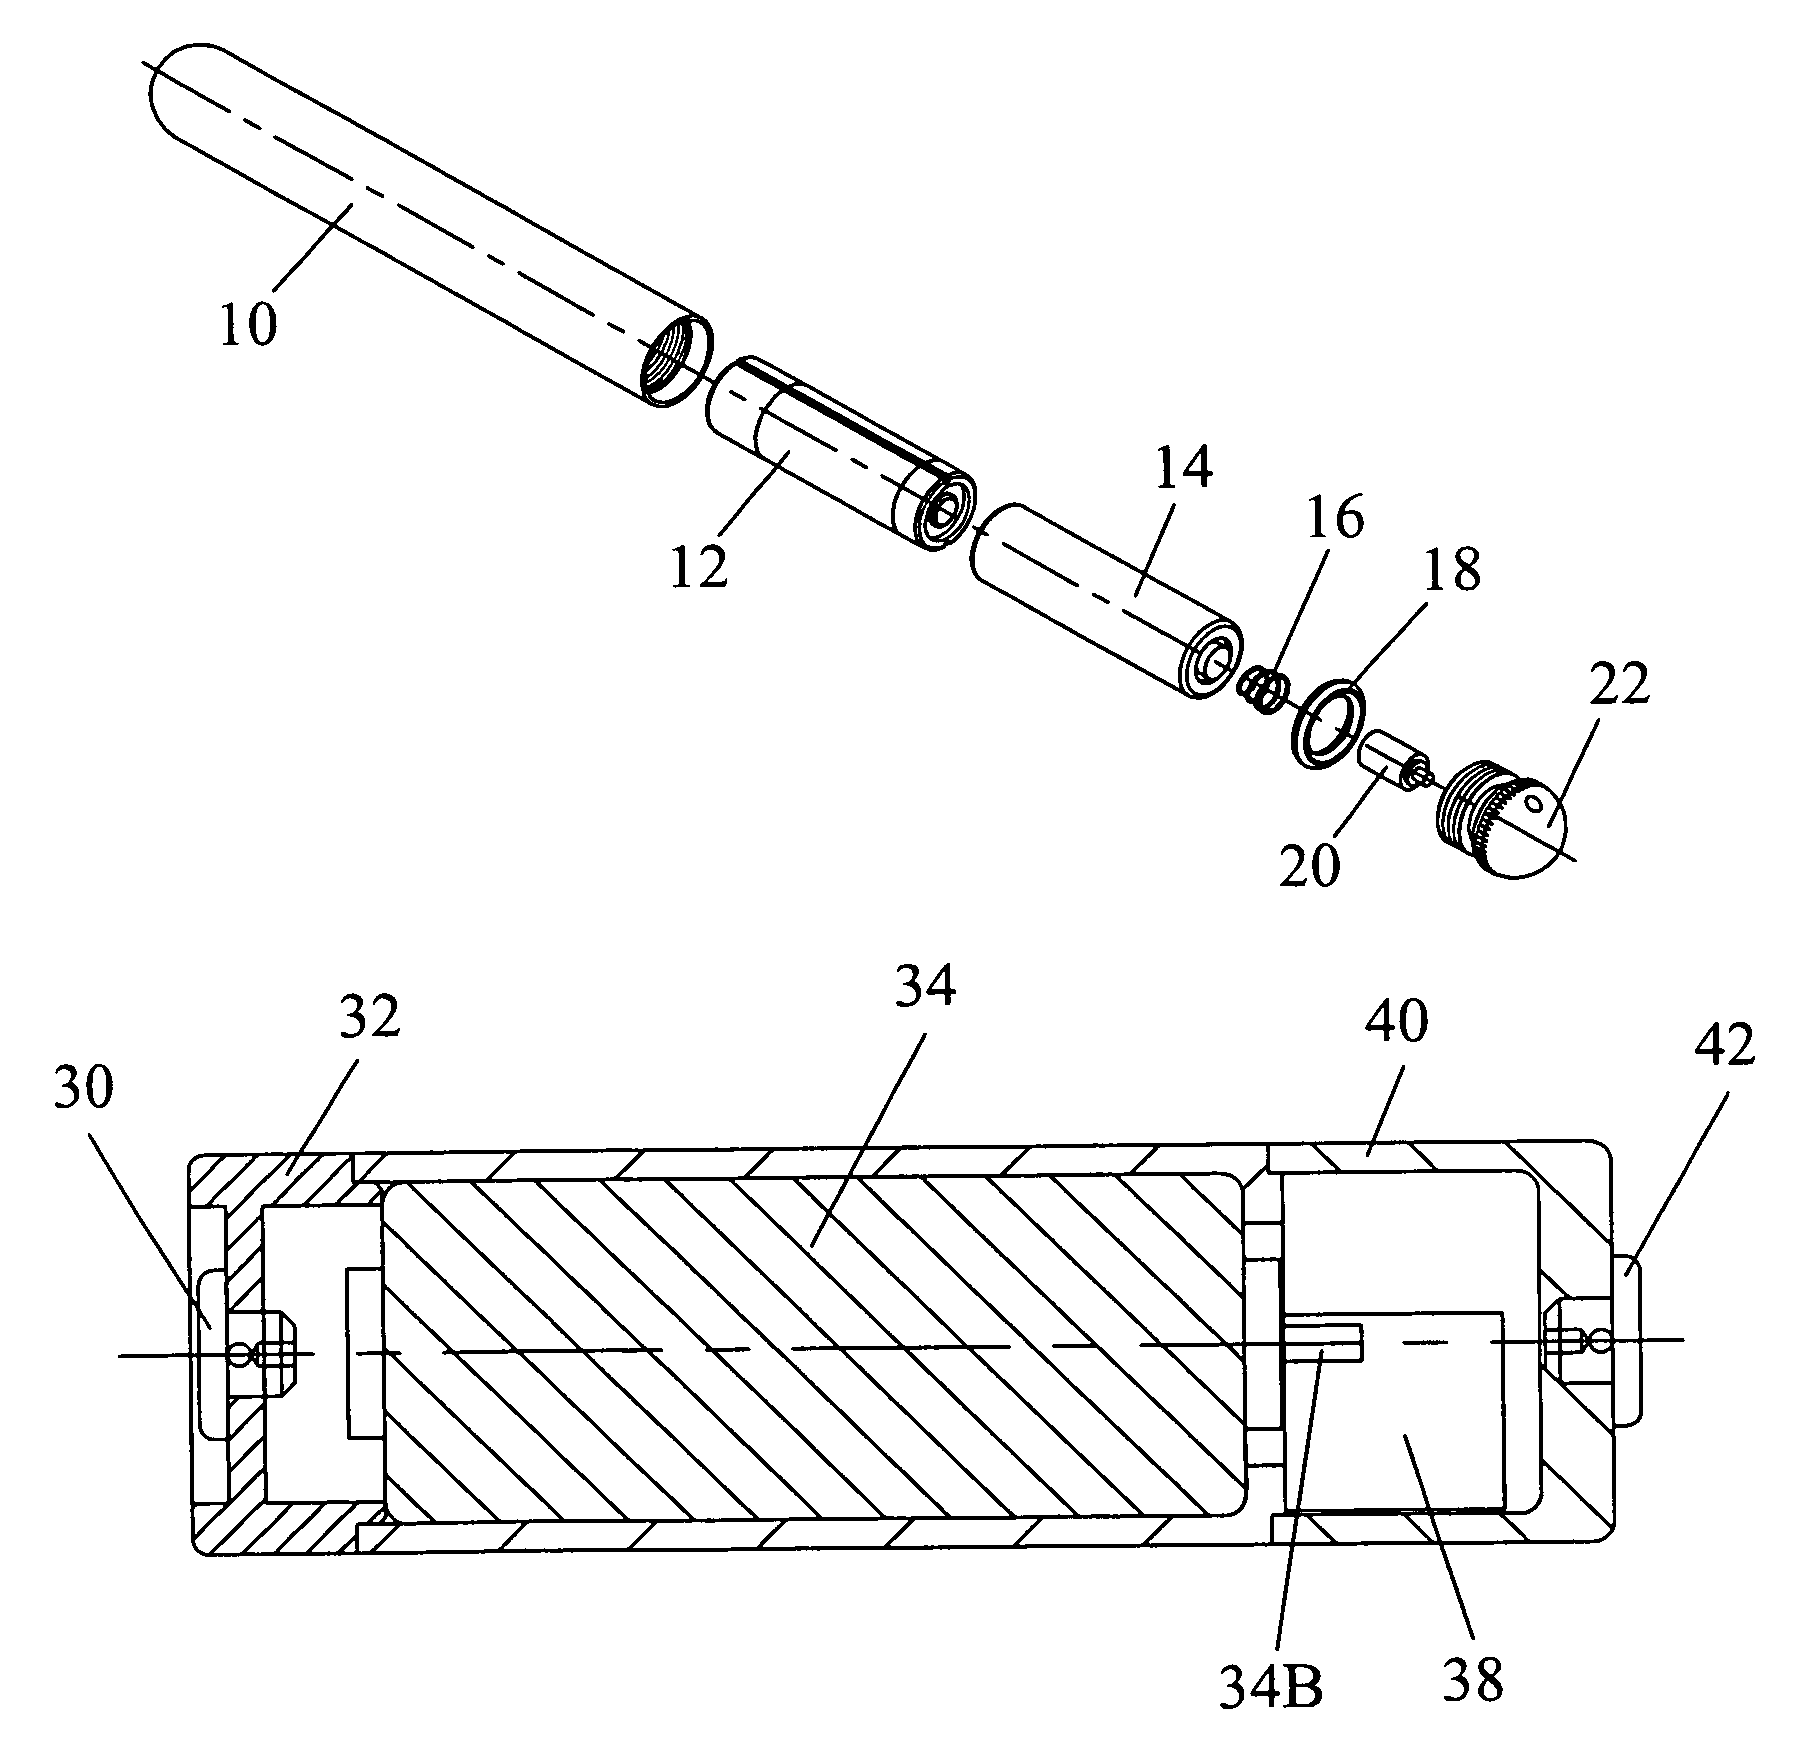 Personal vibrator with replaceable motor having the appearance of a battery